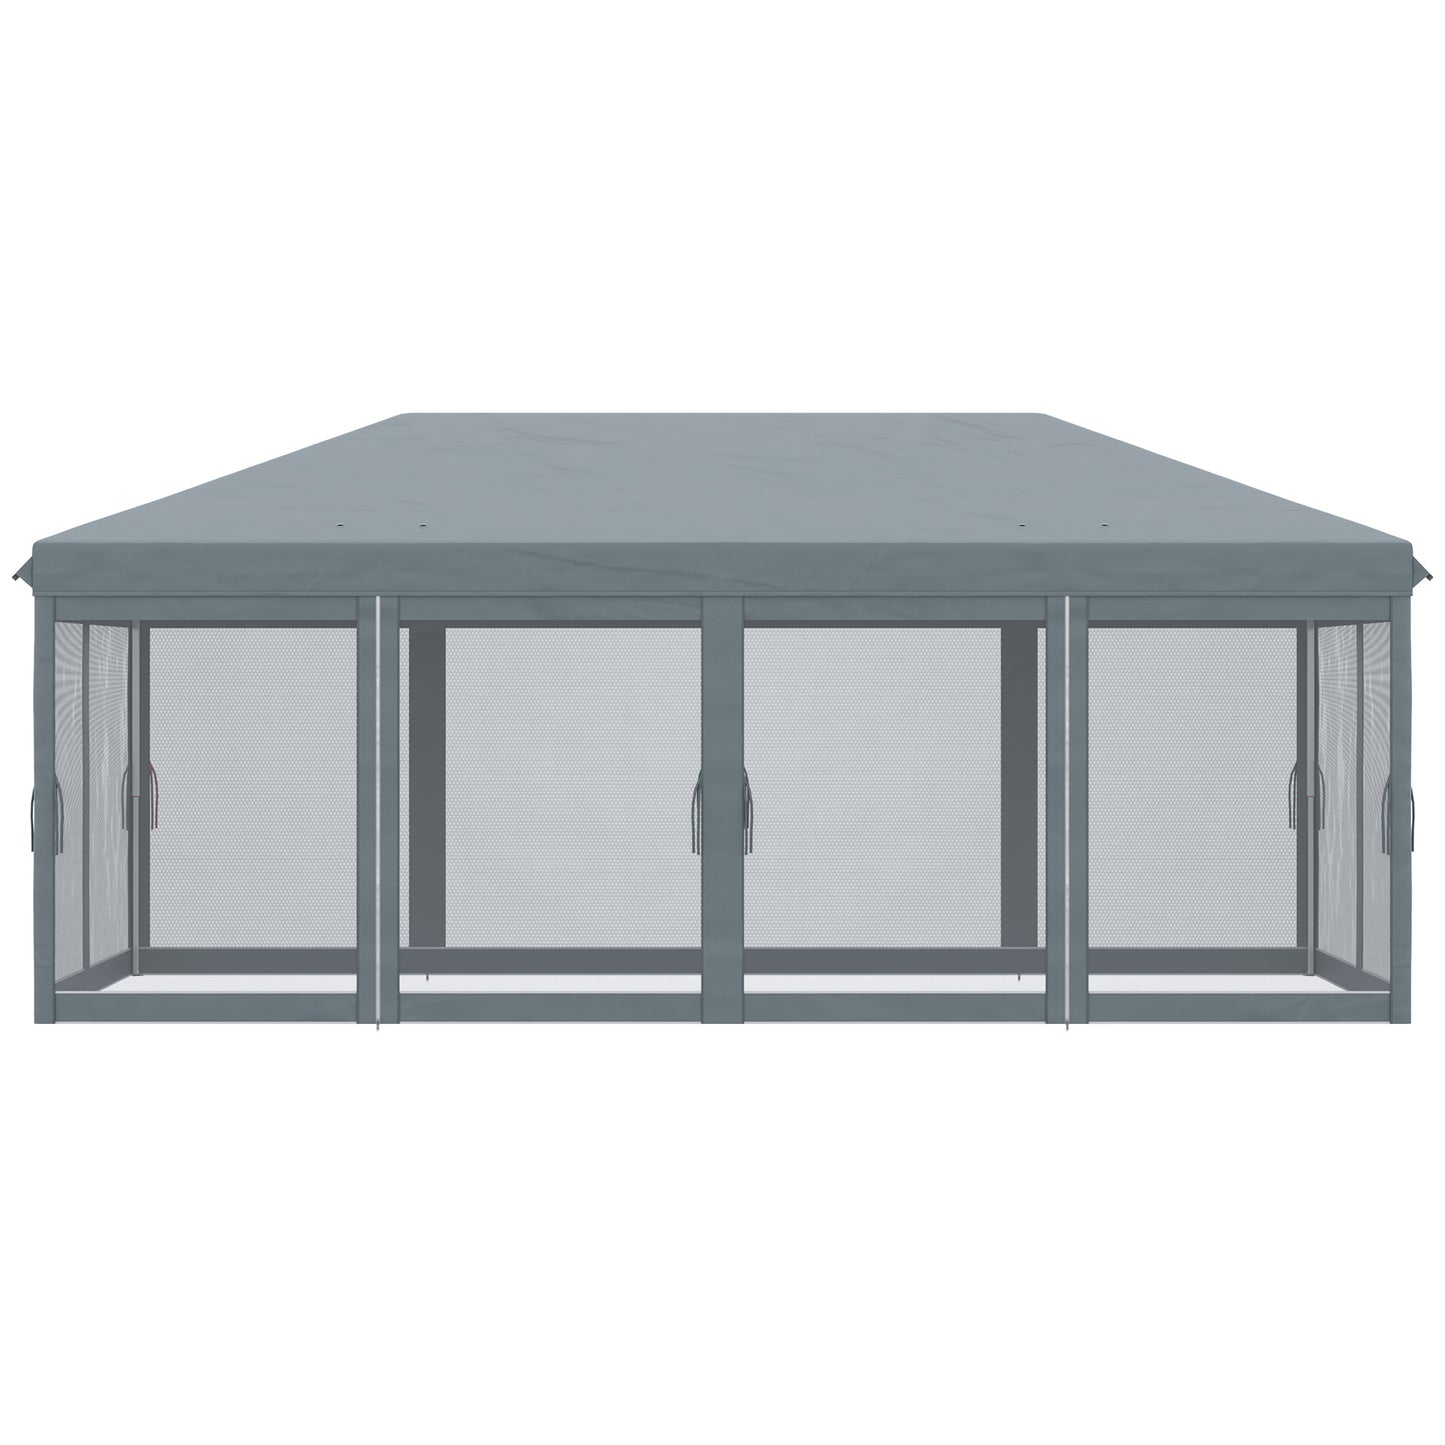 Outsunny 6 x 3m Pop Up Canopy, Outdoor Canopy Shelter, Marquee Party Wedding Tent with 6 Mesh Walls and Carry Bag, Grey